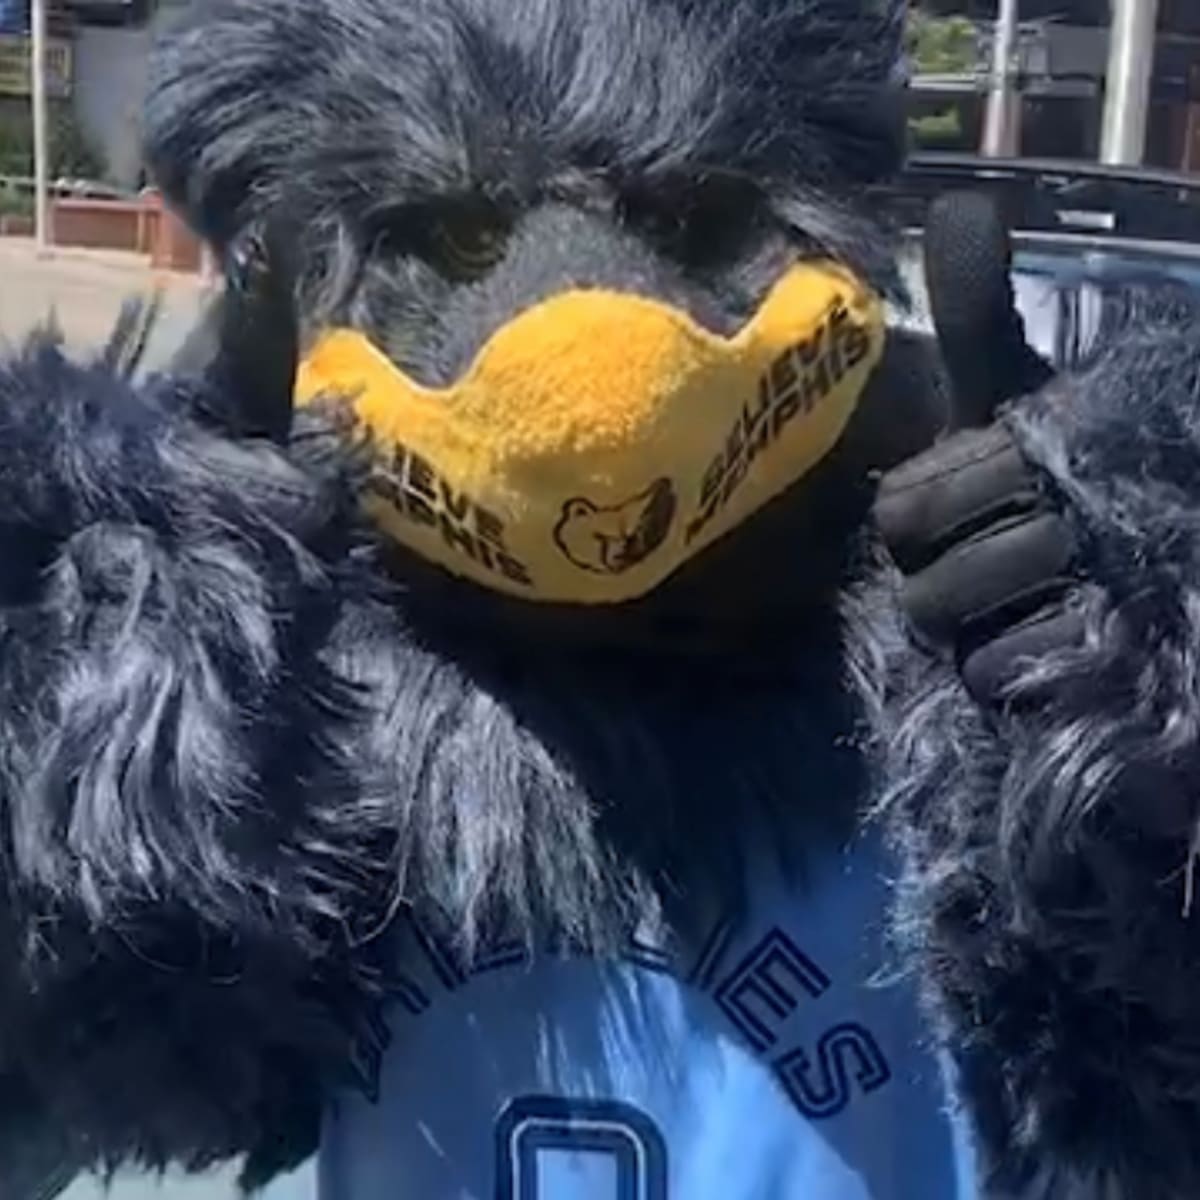 Like we keep saying, best mascot in - Memphis Grizzlies